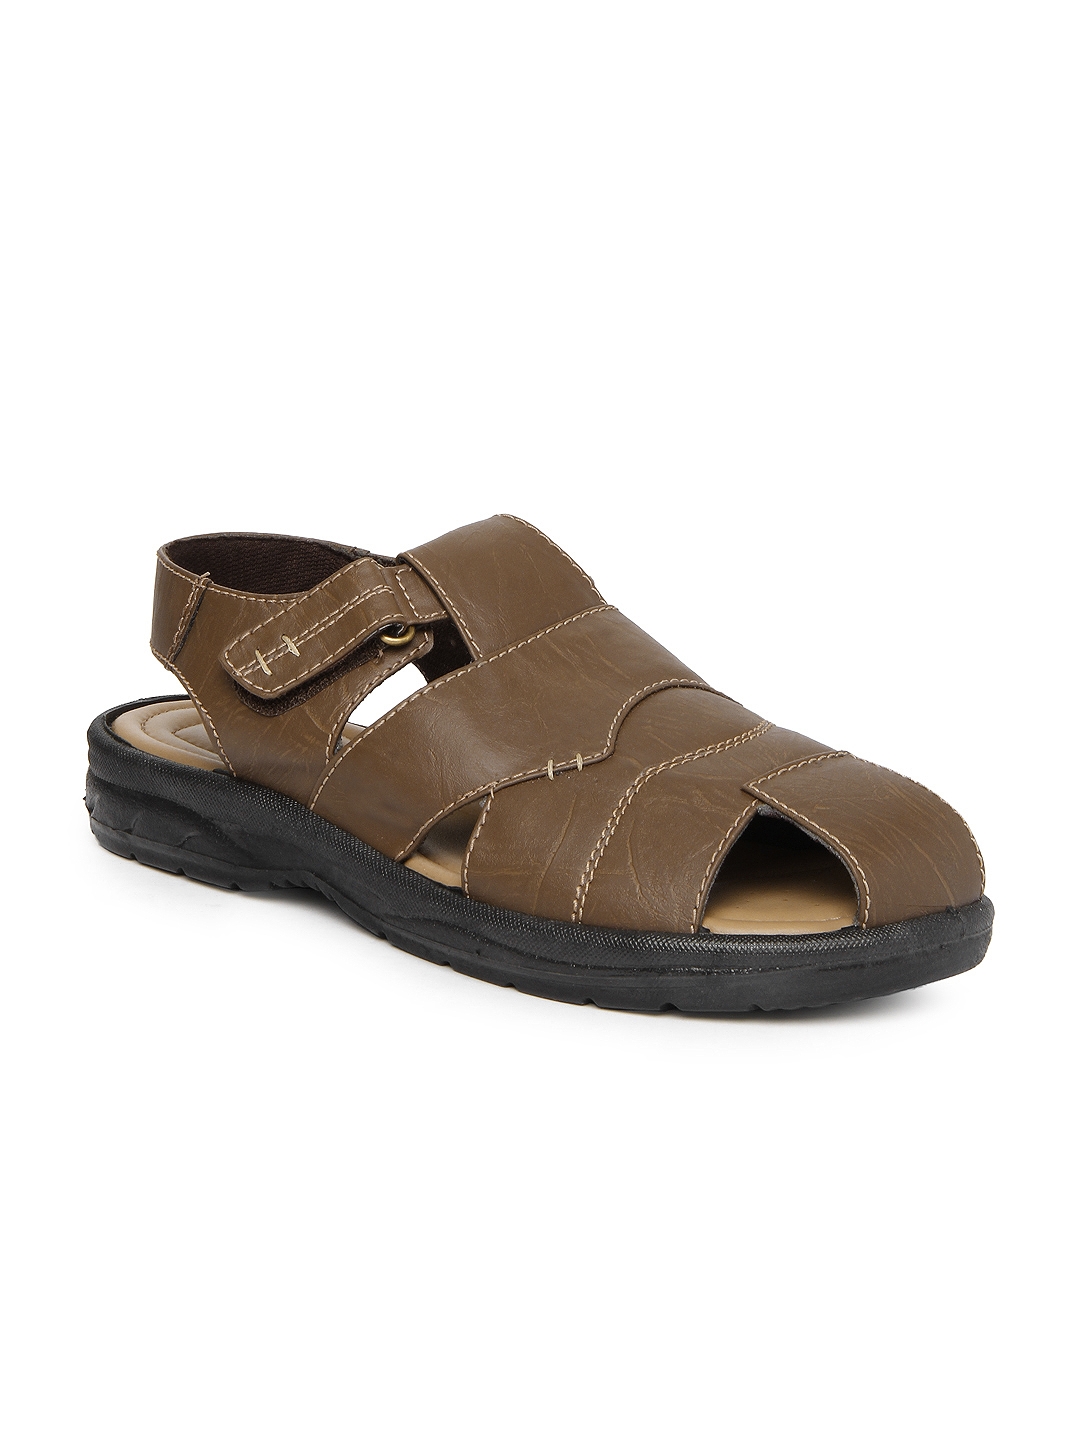 Bata kids Sandals boys new brown no tags size 12 leather | eBay